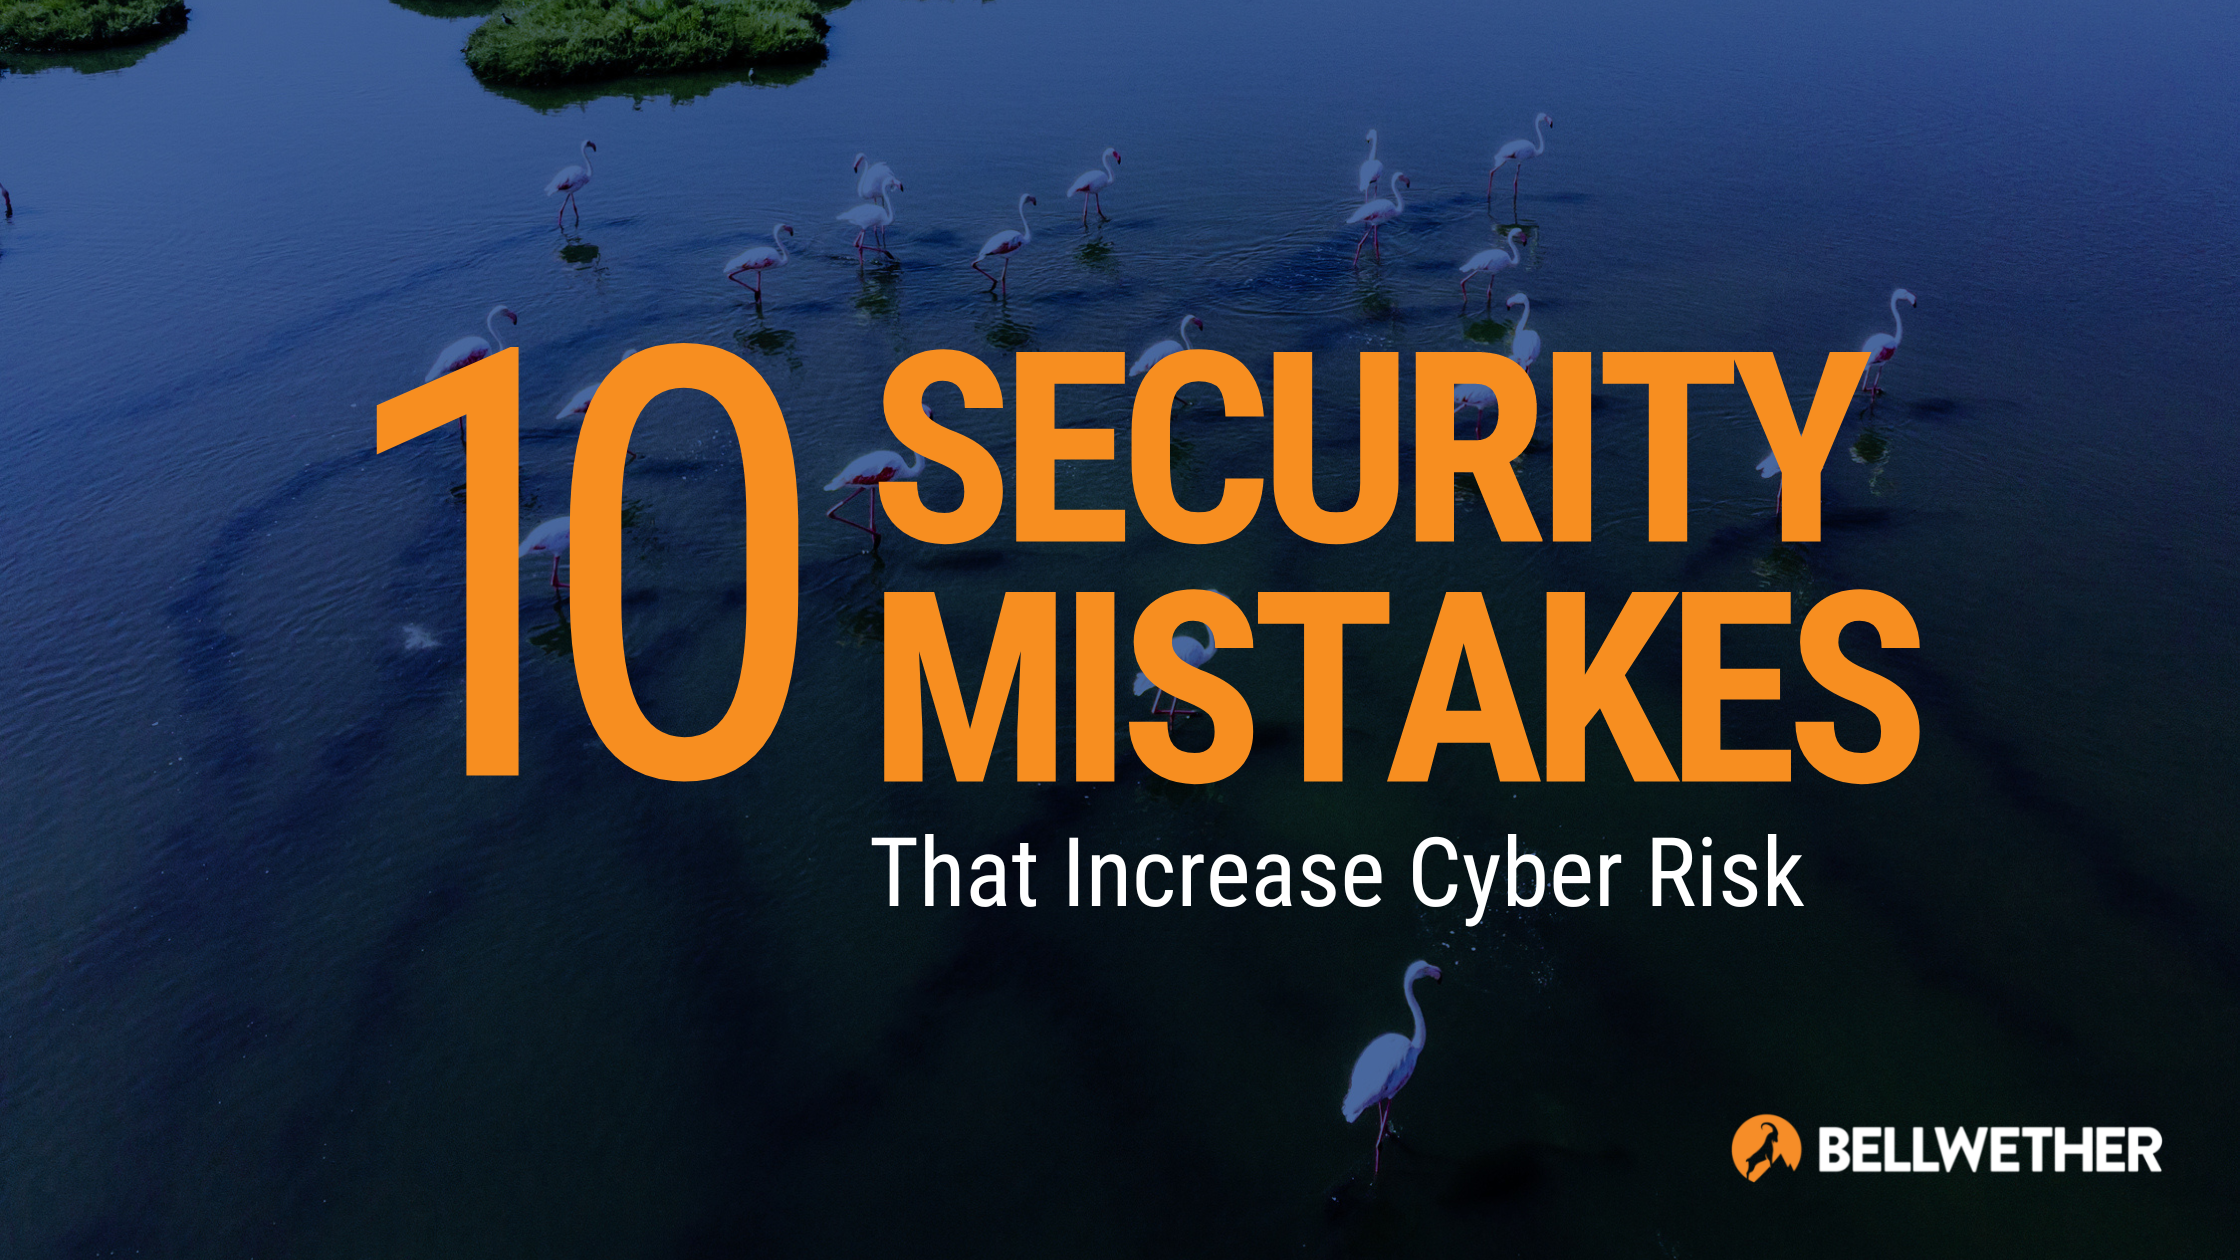 10 security mistakes that increase cyber risk